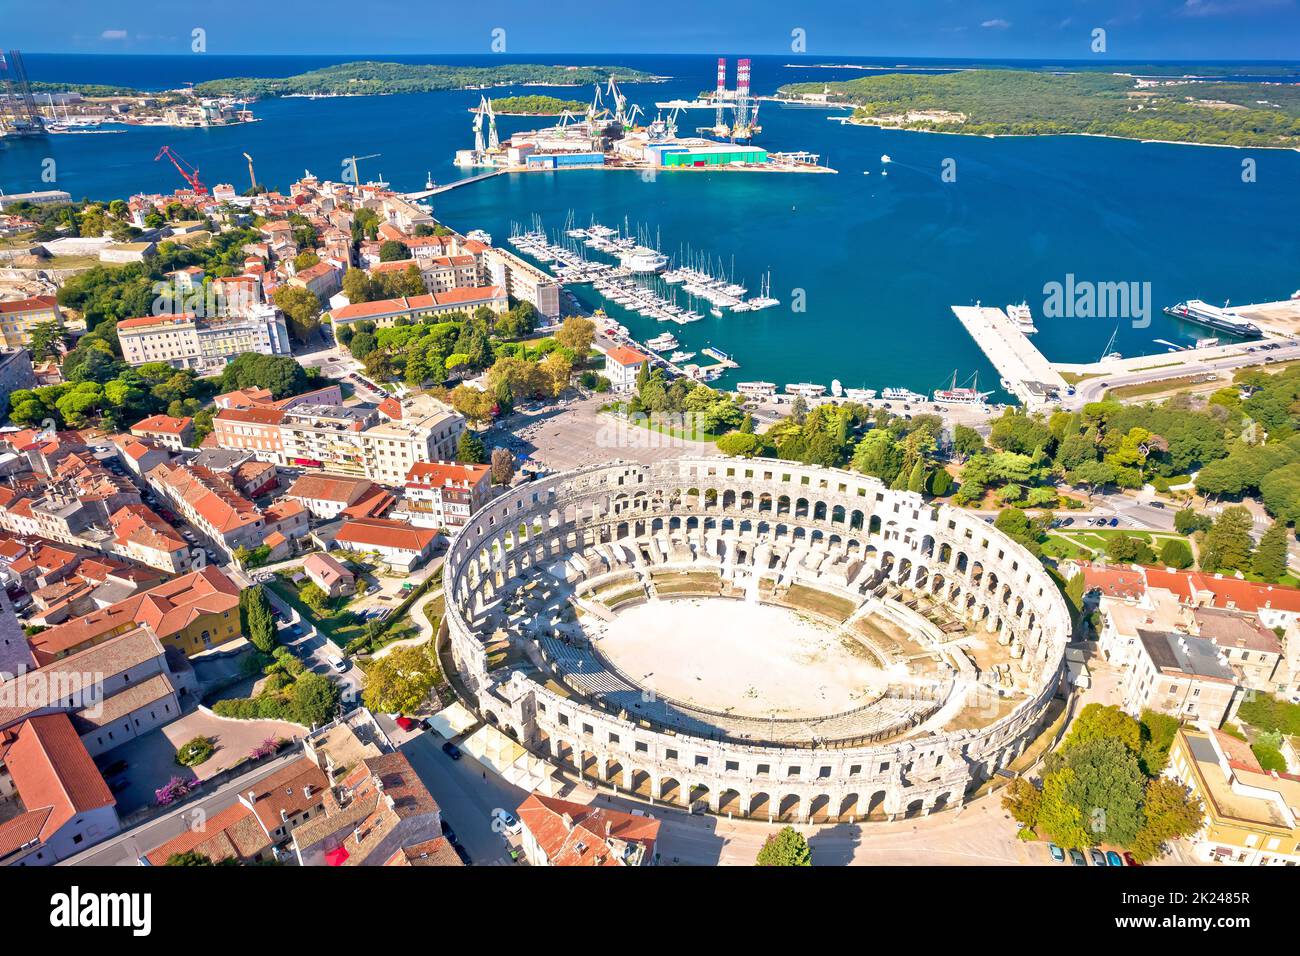 Arena Pula. Ancient ruins of Roman amphitheatre and Pula waterfront aerial view, Istria region of Croatia Stock Photo